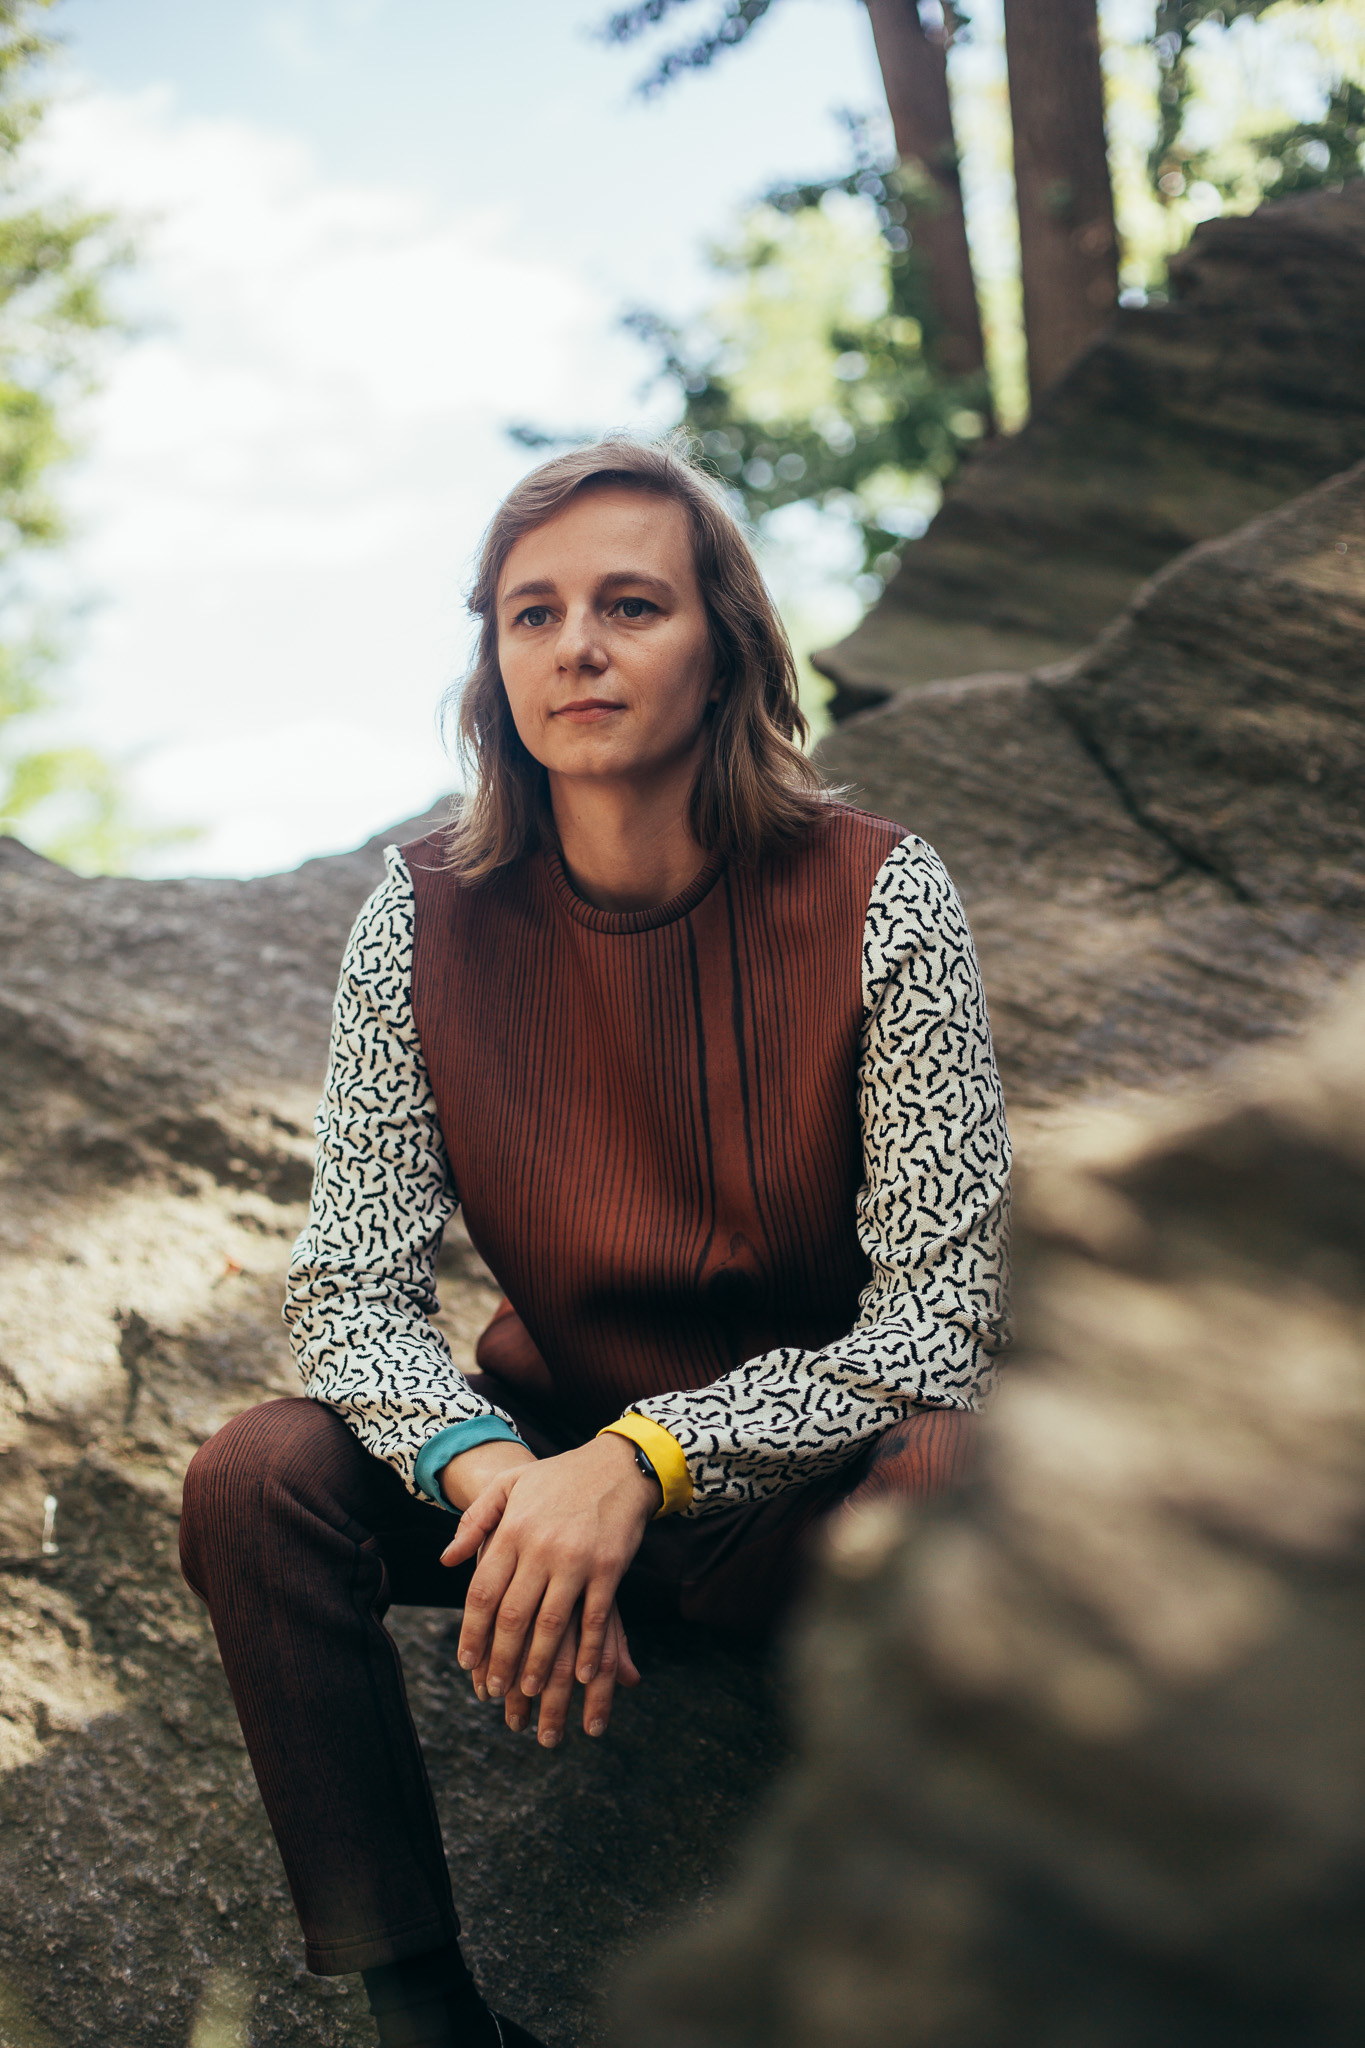 Portrait of Shannon sitting outside on a sunny day among large, flat rocks, smiling softly and looking off in another direction. She is wearing a wood grain sweatshirt and pant set. The sweatshirt has contrasting sleeves with a squiggle pattern and sleeve cuffs in two different colors.